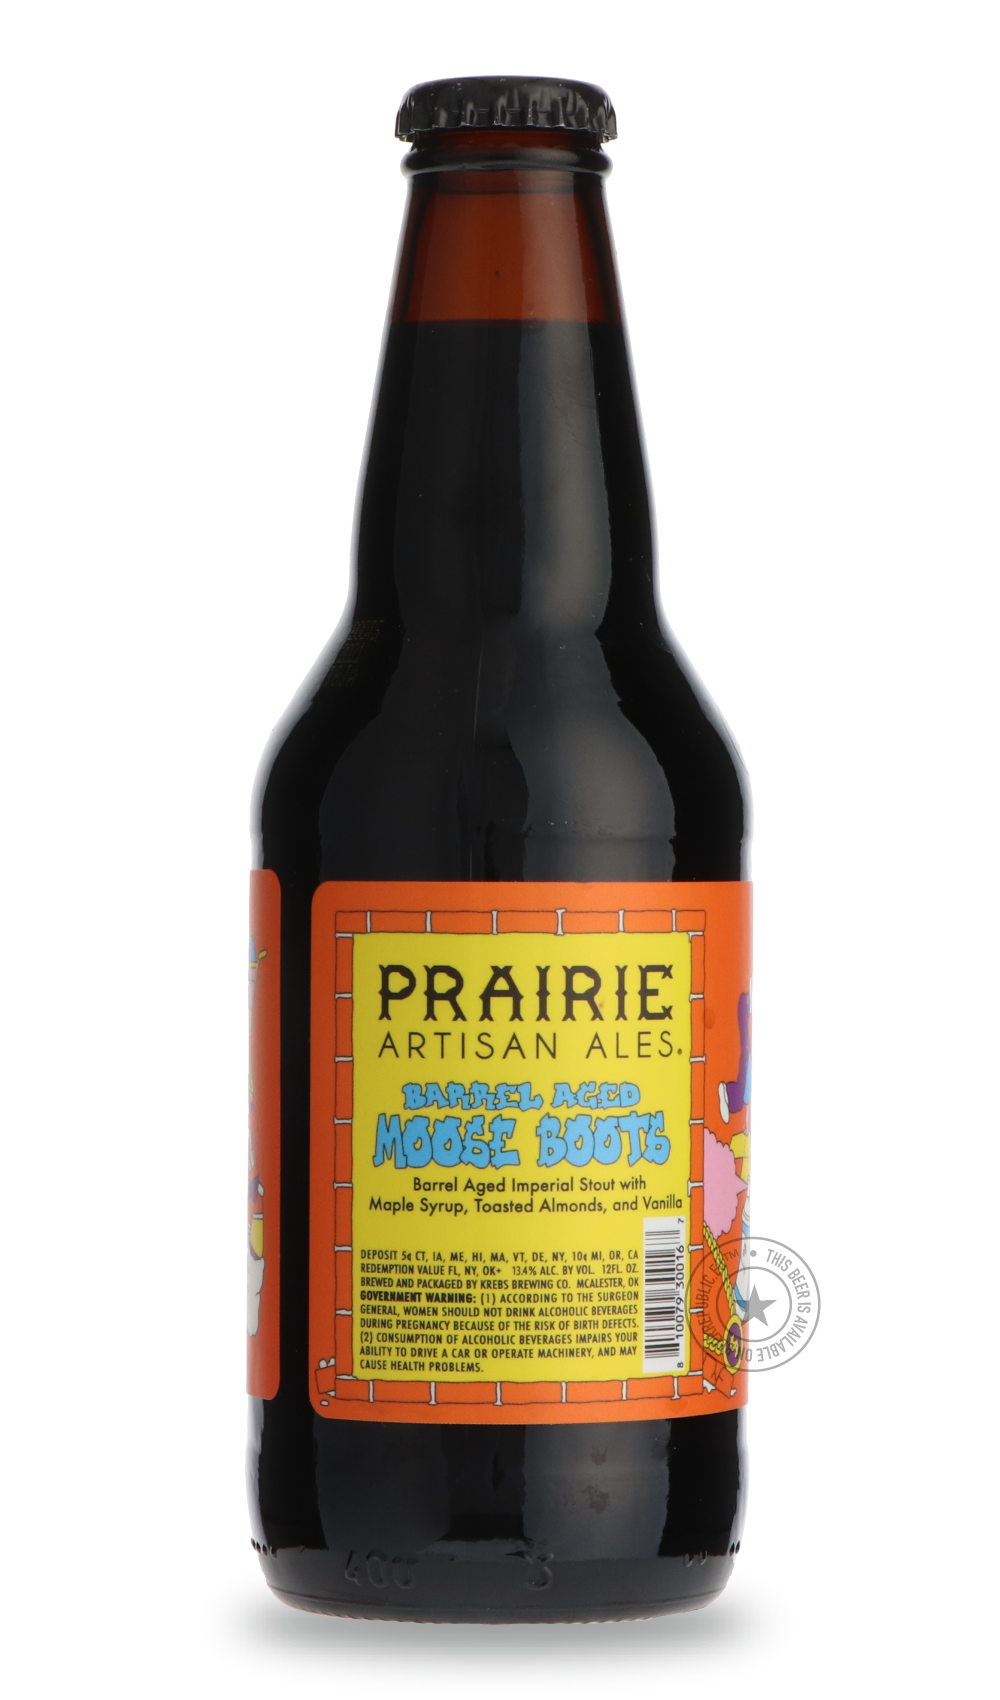 -Prairie- Barrel Aged Moose Boots-Stout & Porter- Only @ Beer Republic - The best online beer store for American & Canadian craft beer - Buy beer online from the USA and Canada - Bier online kopen - Amerikaans bier kopen - Craft beer store - Craft beer kopen - Amerikanisch bier kaufen - Bier online kaufen - Acheter biere online - IPA - Stout - Porter - New England IPA - Hazy IPA - Imperial Stout - Barrel Aged - Barrel Aged Imperial Stout - Brown - Dark beer - Blond - Blonde - Pilsner - Lager - Wheat - Weize